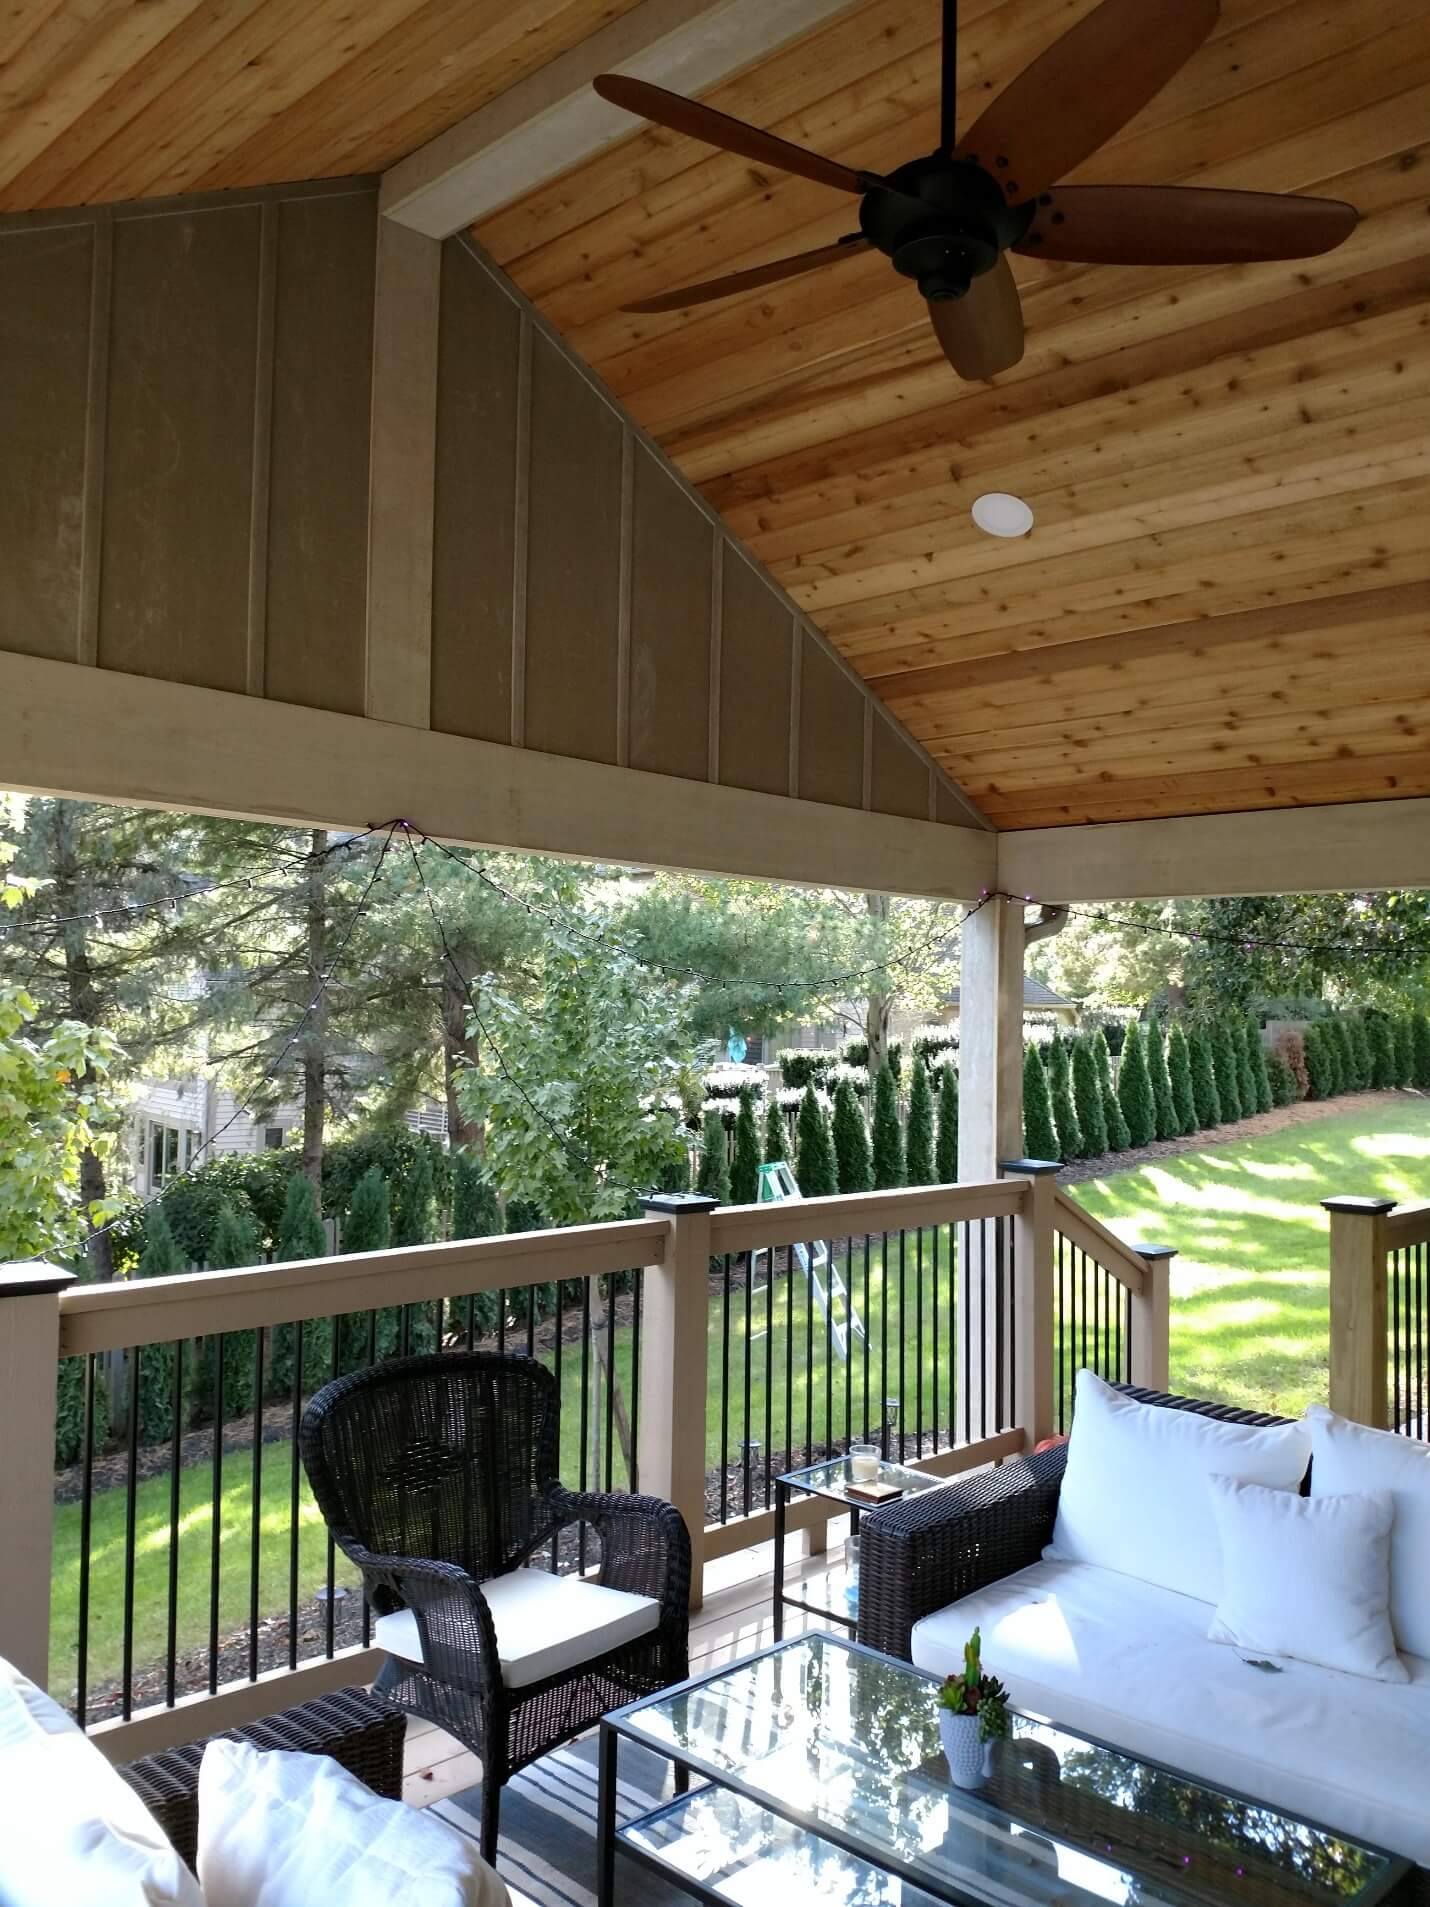 Covered porch seating area and backyard view